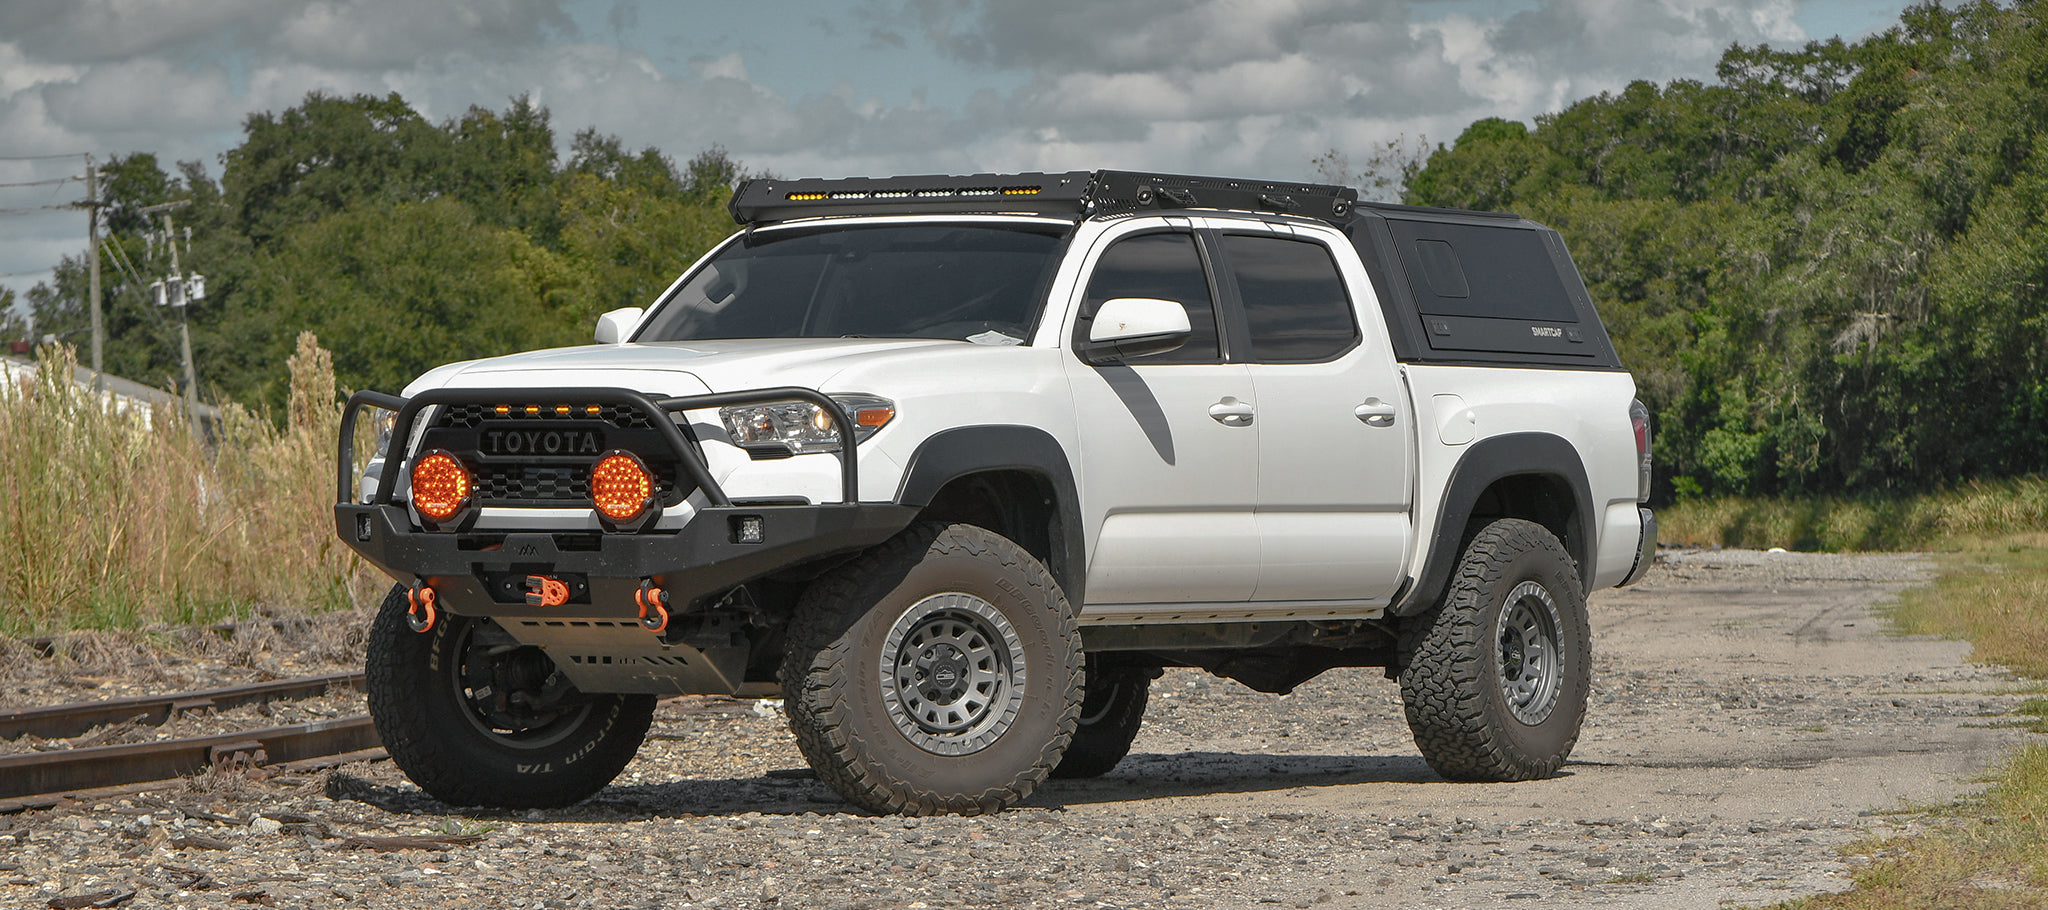 overland sector toyota tacoma on gray venture top pic